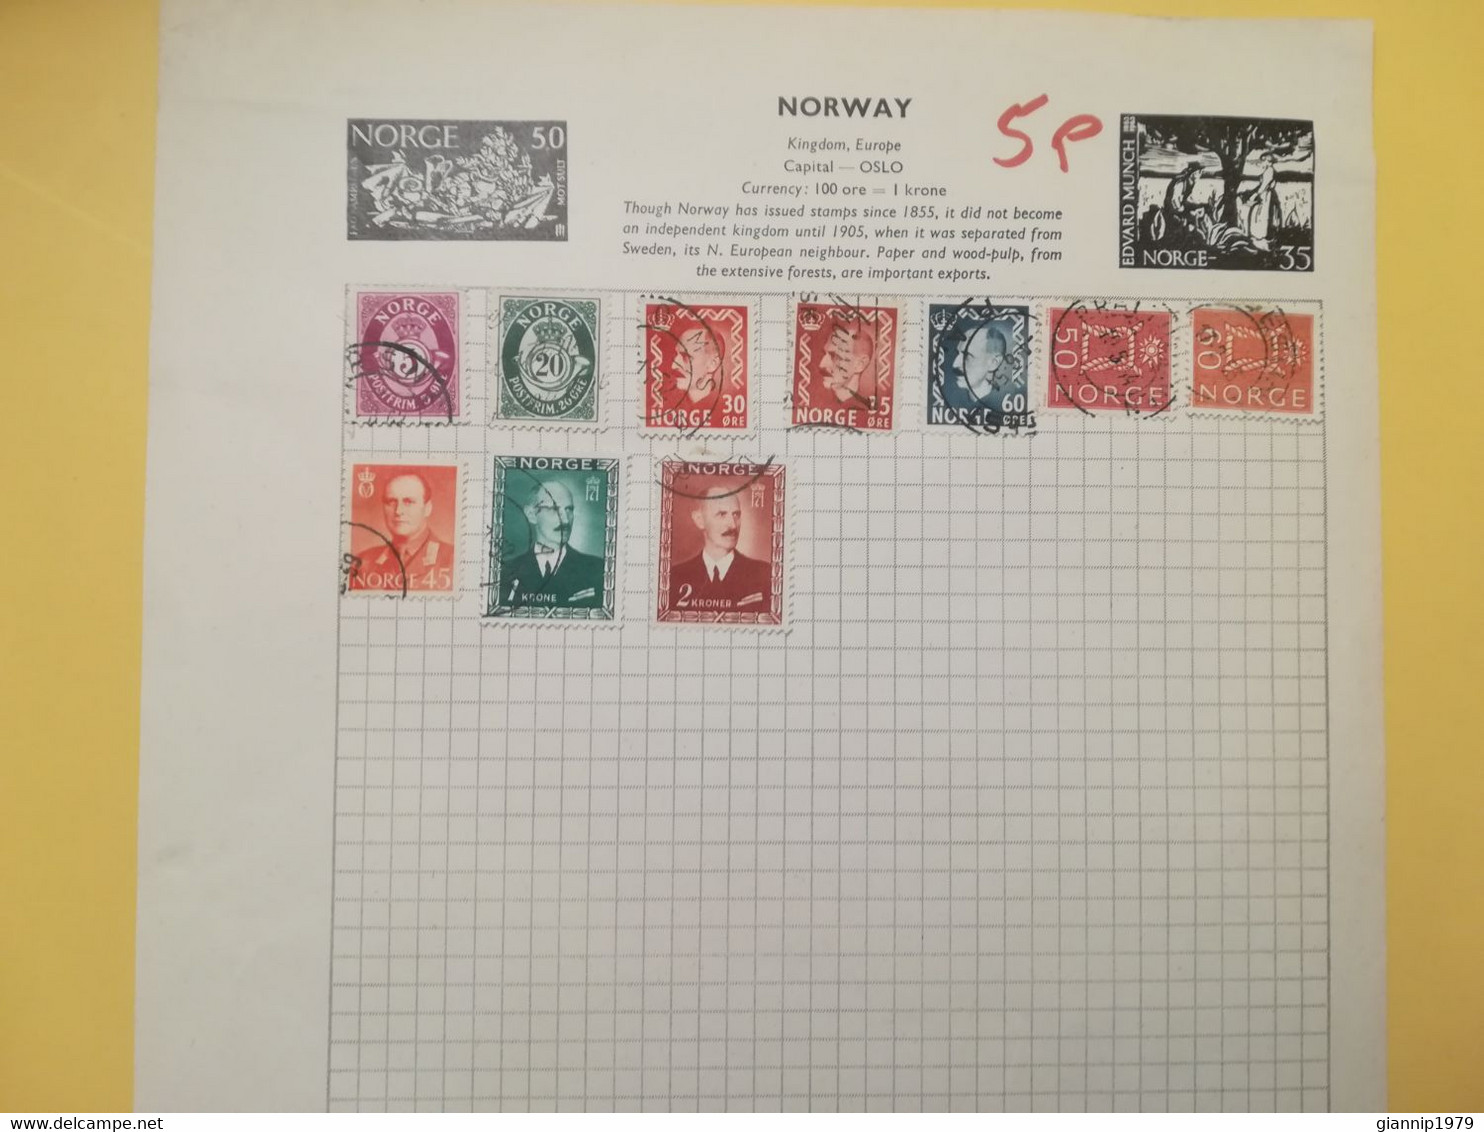 PAGINA PAGE ALBUM NORVEGIA NORGE NORWAY 1921 ATTACCATI PAGE WITH STAMPS COLLEZIONI LOTTO LOT LOTS - Sammlungen